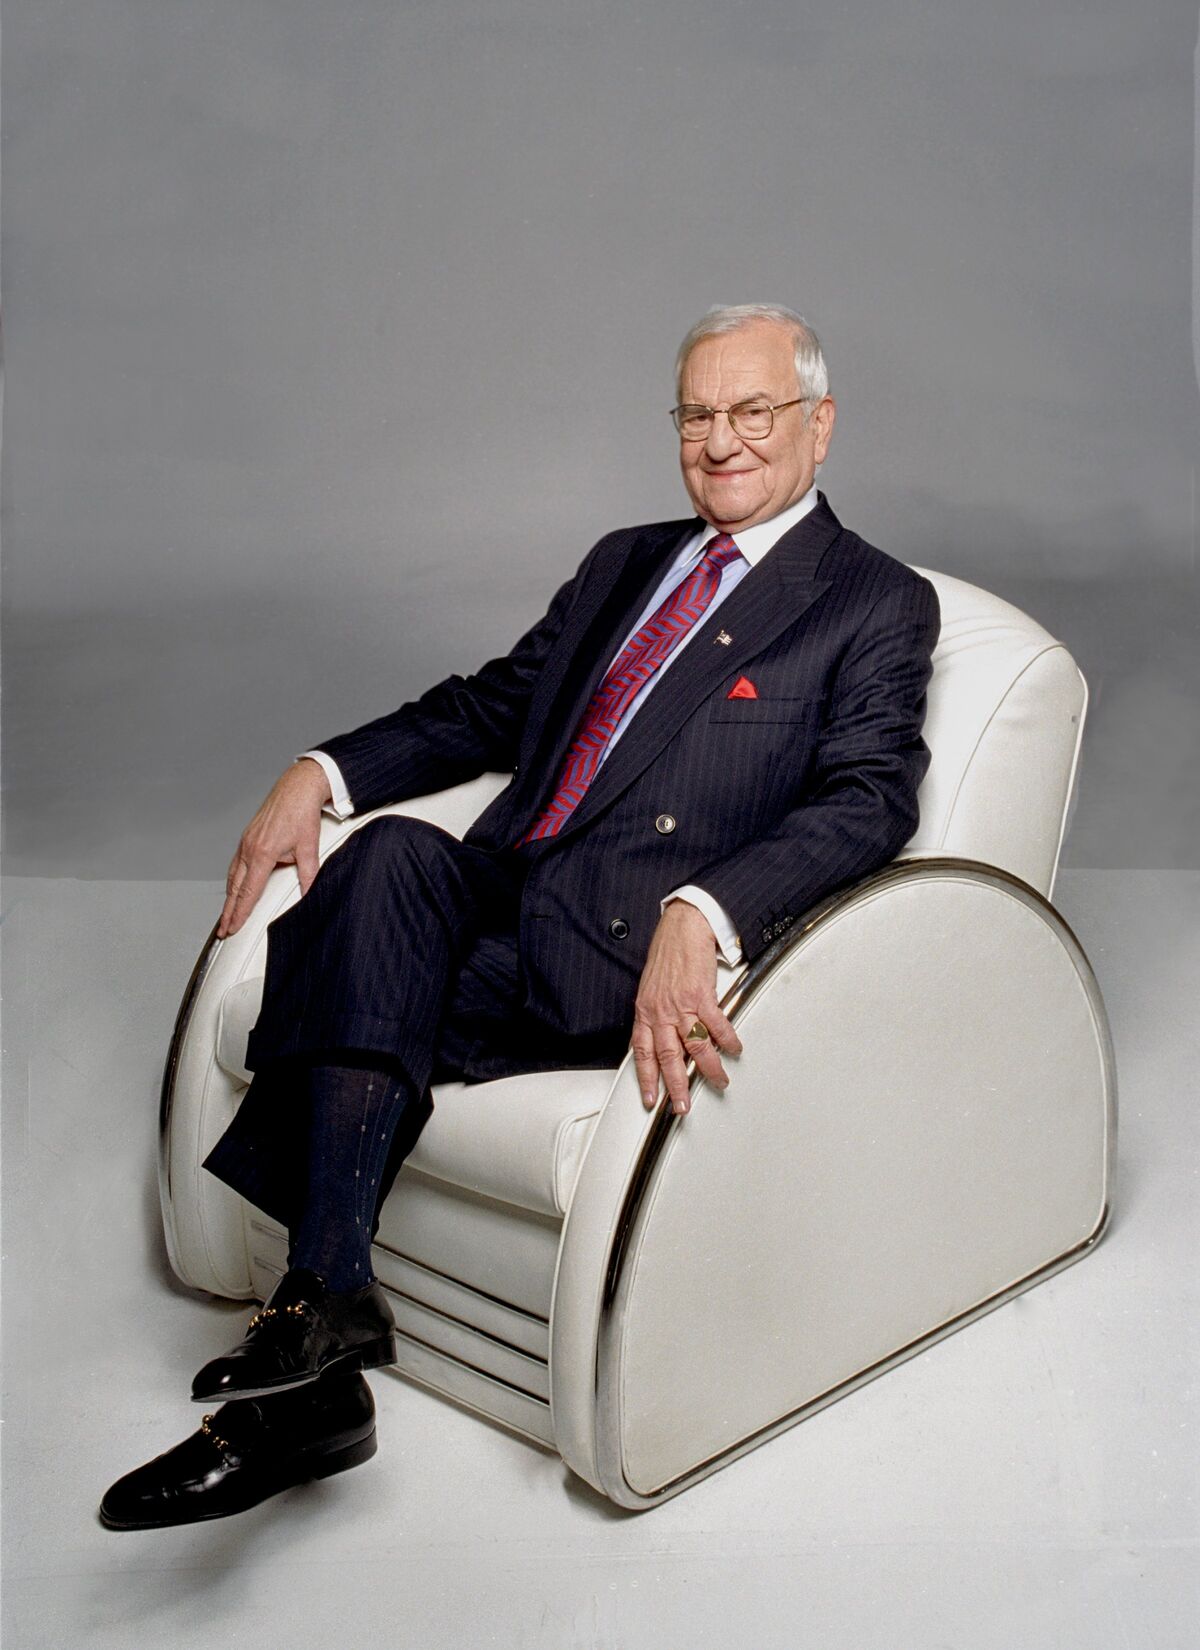 Lee Iacocca, Star CEO Who Led Ford, Saved Chrysler, Has Died - Bloomberg